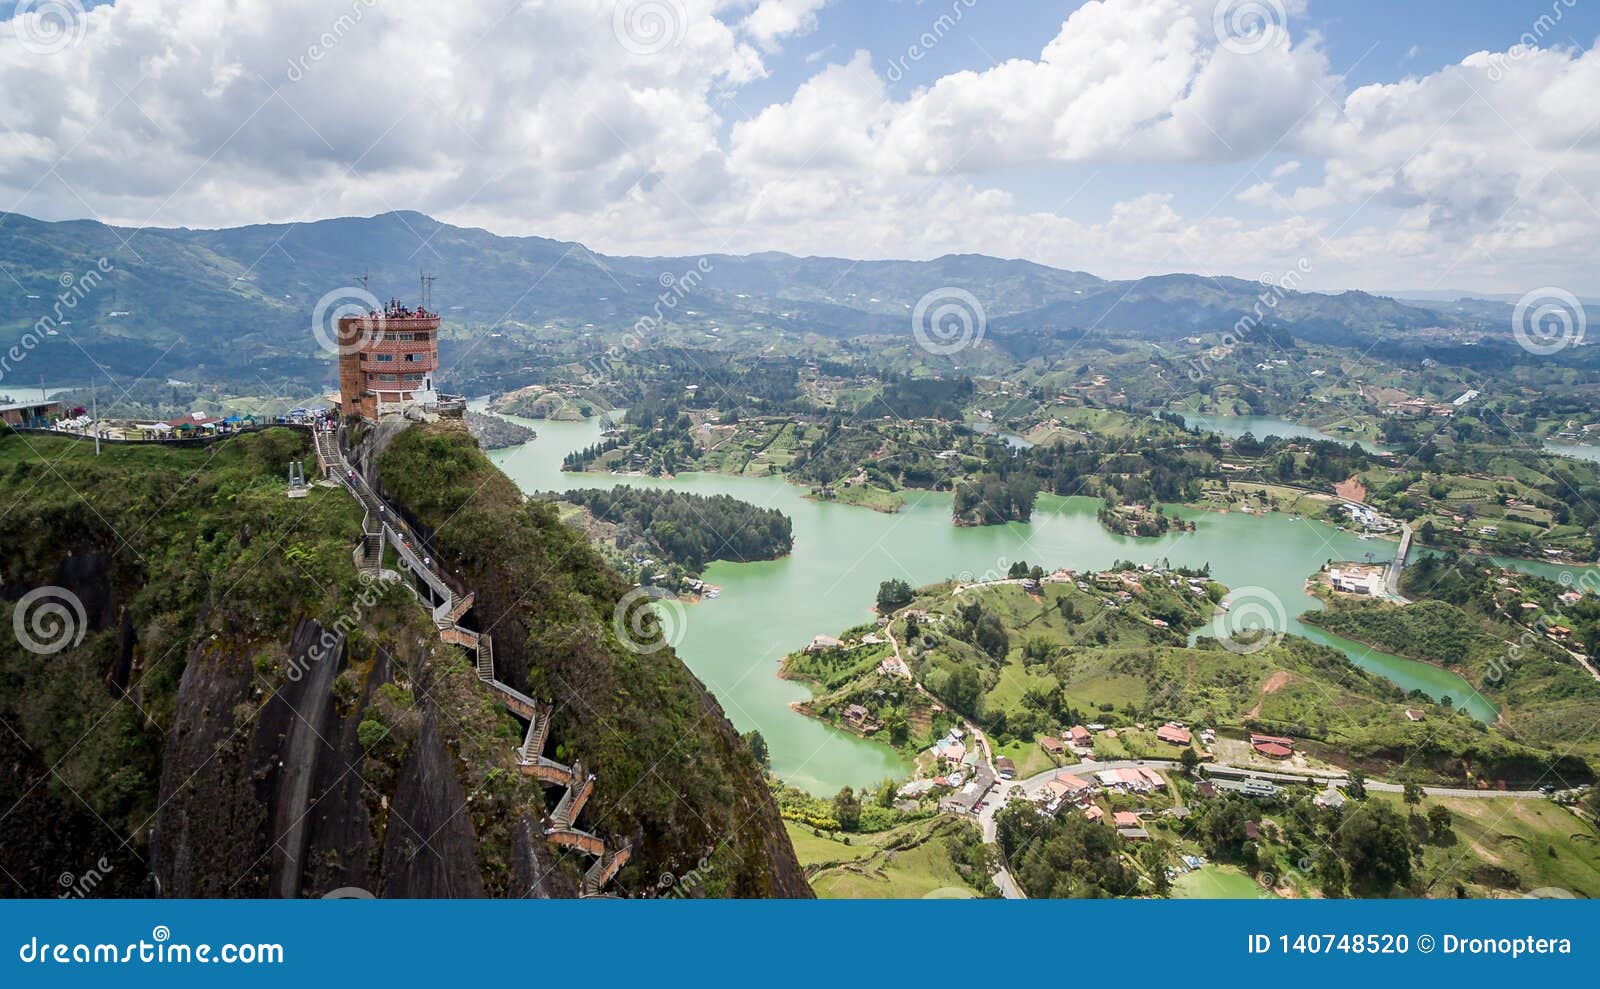 close up aerial drone view of peÃÂ±ÃÂ³n of guatapÃÂ© in colombia